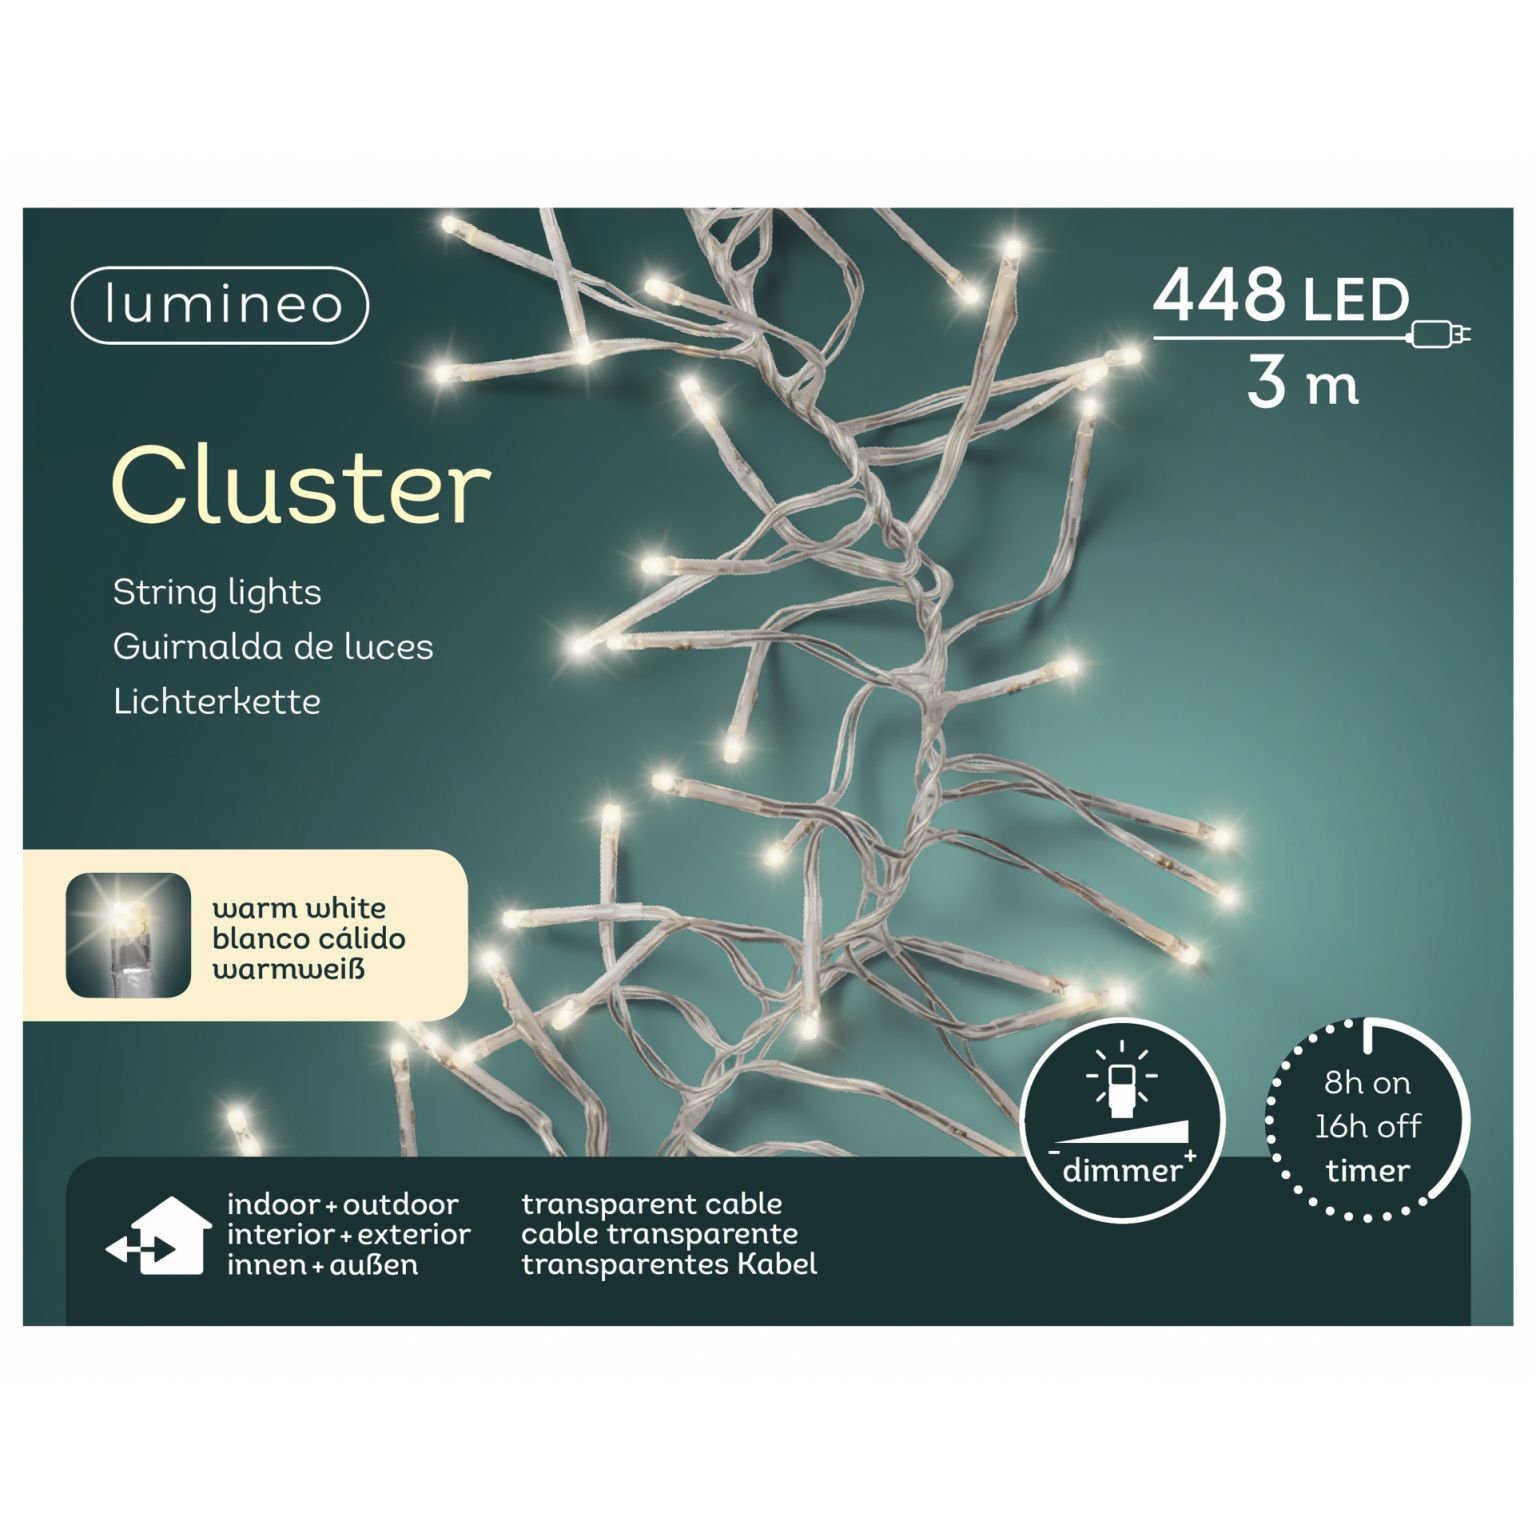 Clusterverlichting lumineo 448-lamps LED 'warm wit ' transparante snoer